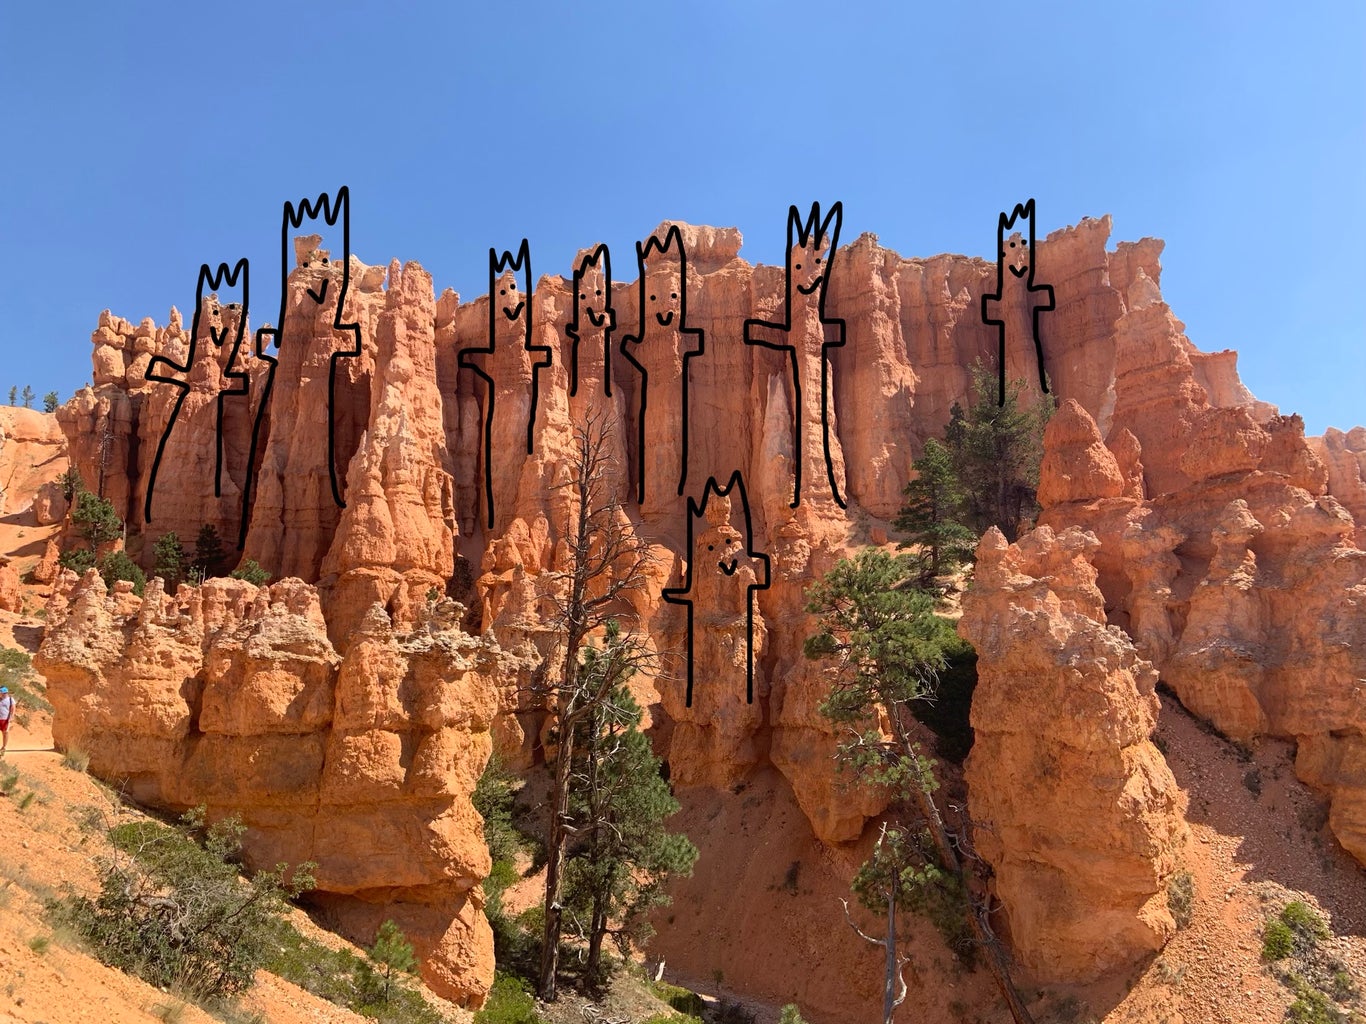 Bryce Canyon hoodoo\'s photoshopped to have bodies